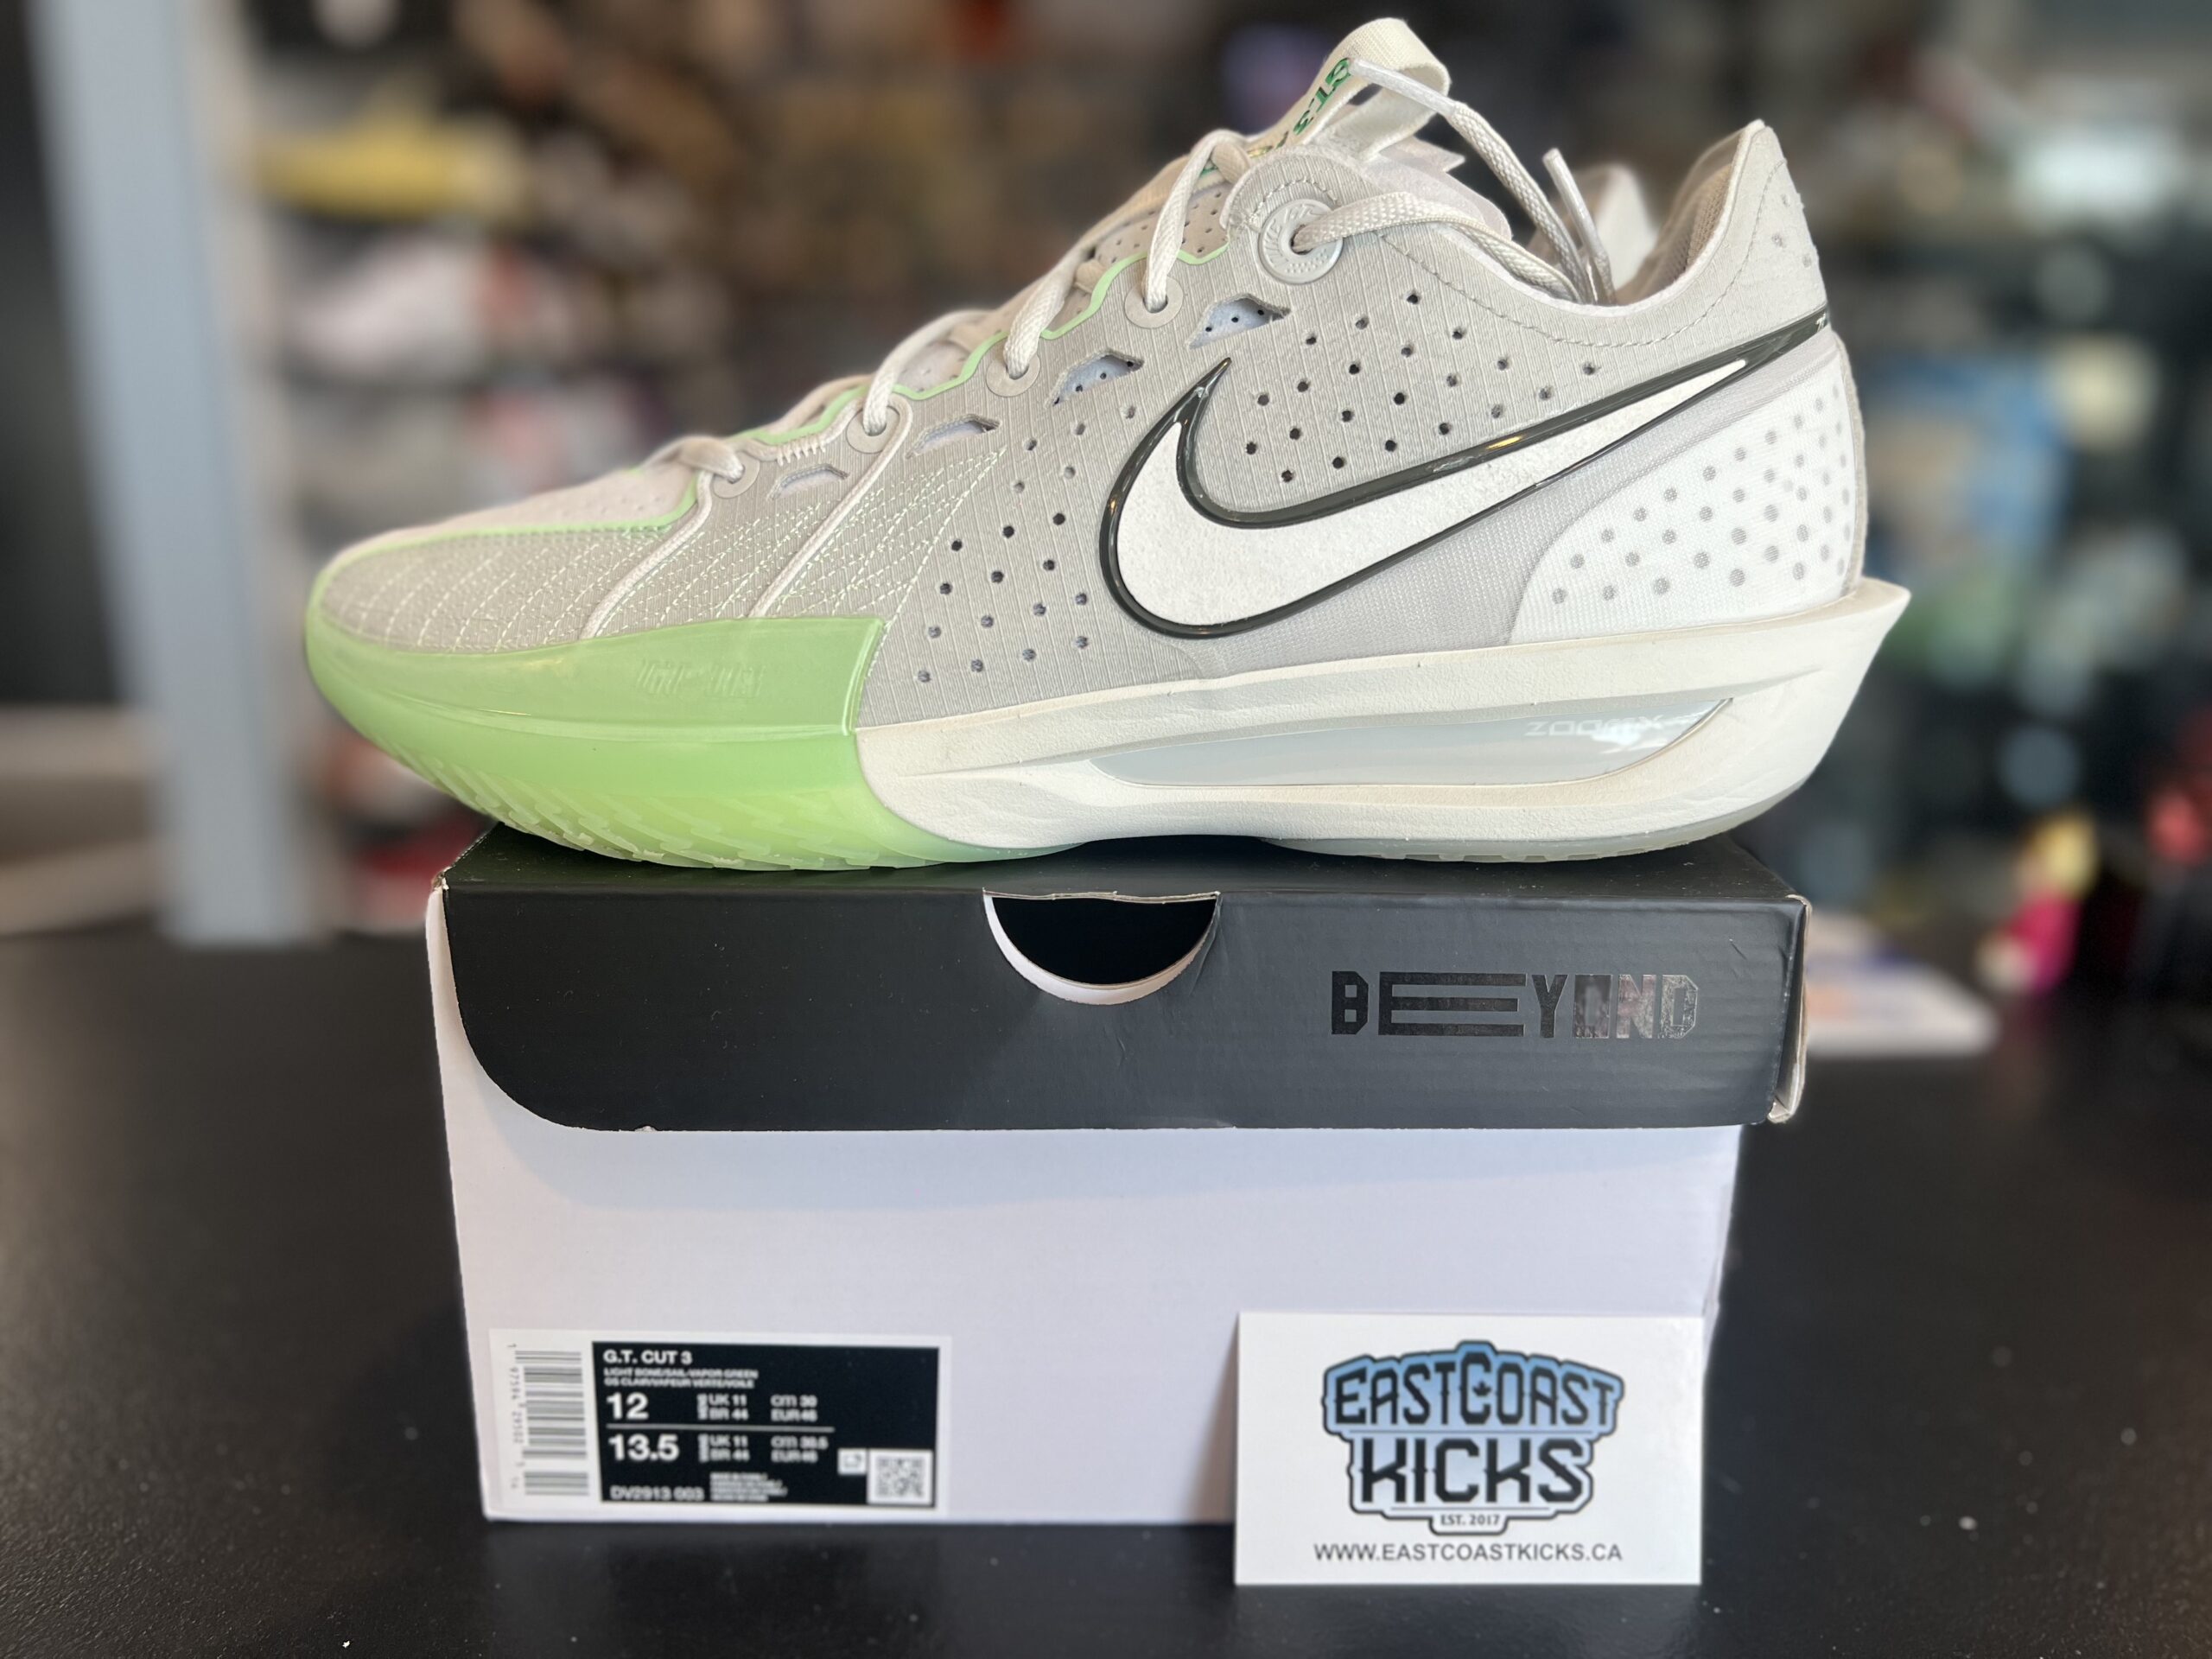 Preowned Nike Air Zoom GT Cut 3 Vapor Green Size 12